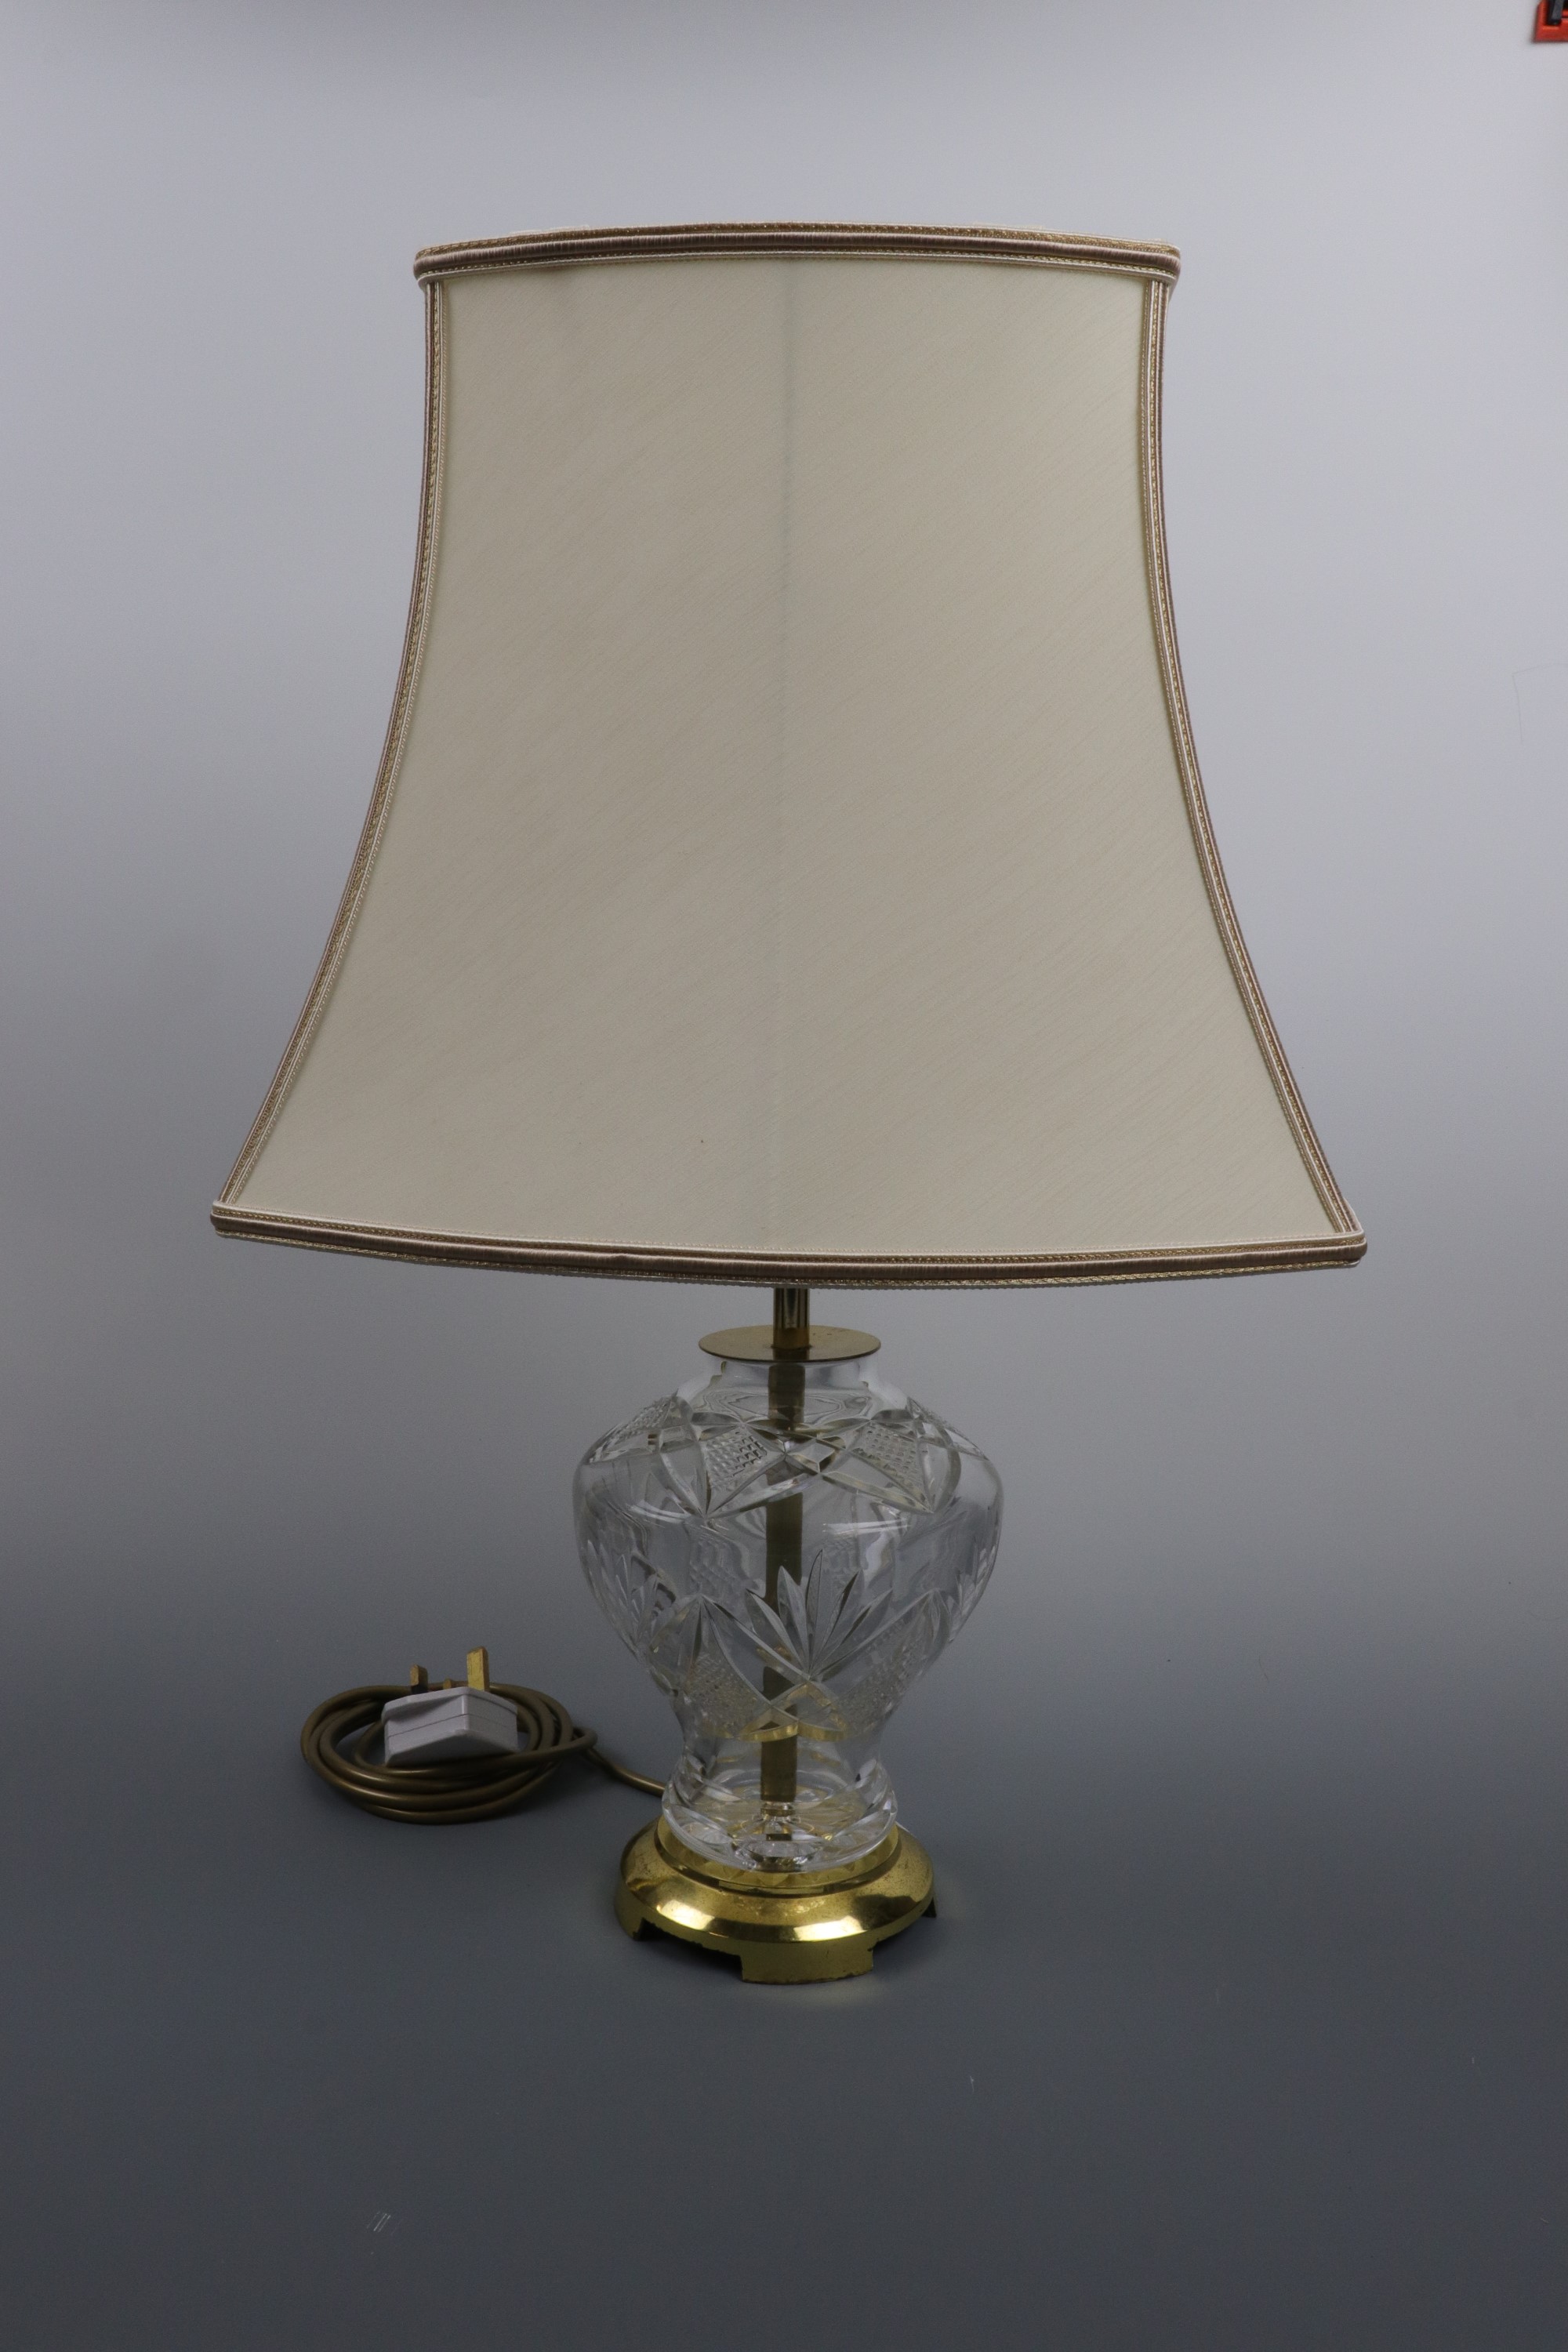 A glass table lamp and shade, 57 cm high